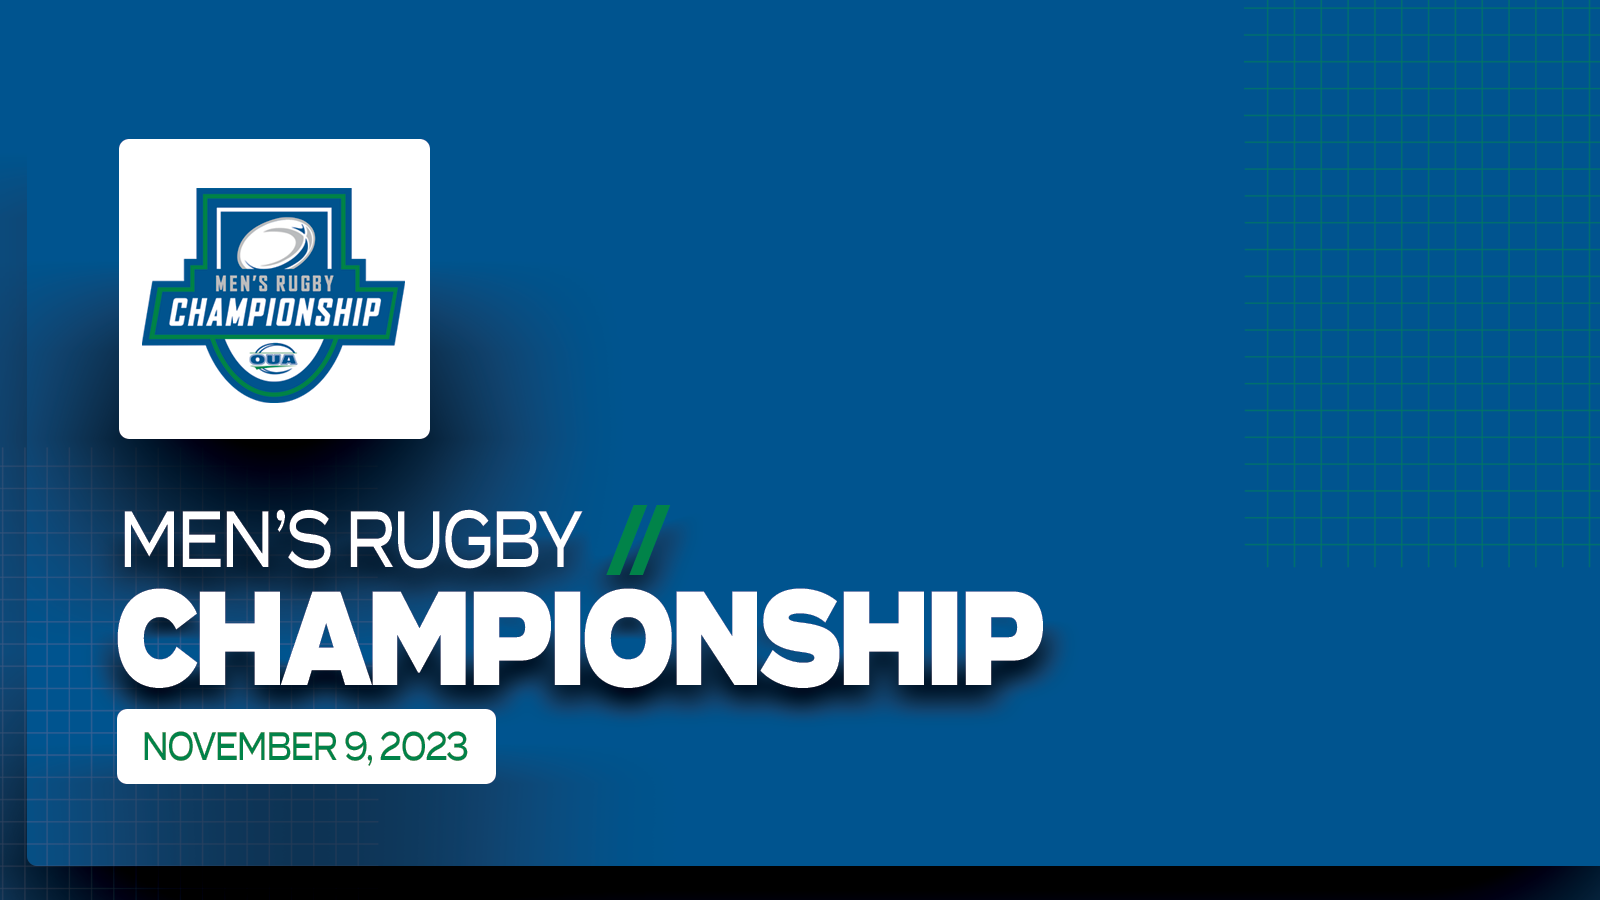 Predominantly blue graphic with large white text on the left side that reads Men?s Rugby Championship, November 9, 2023? beneath the OUA Men?s Rugby Championship logo